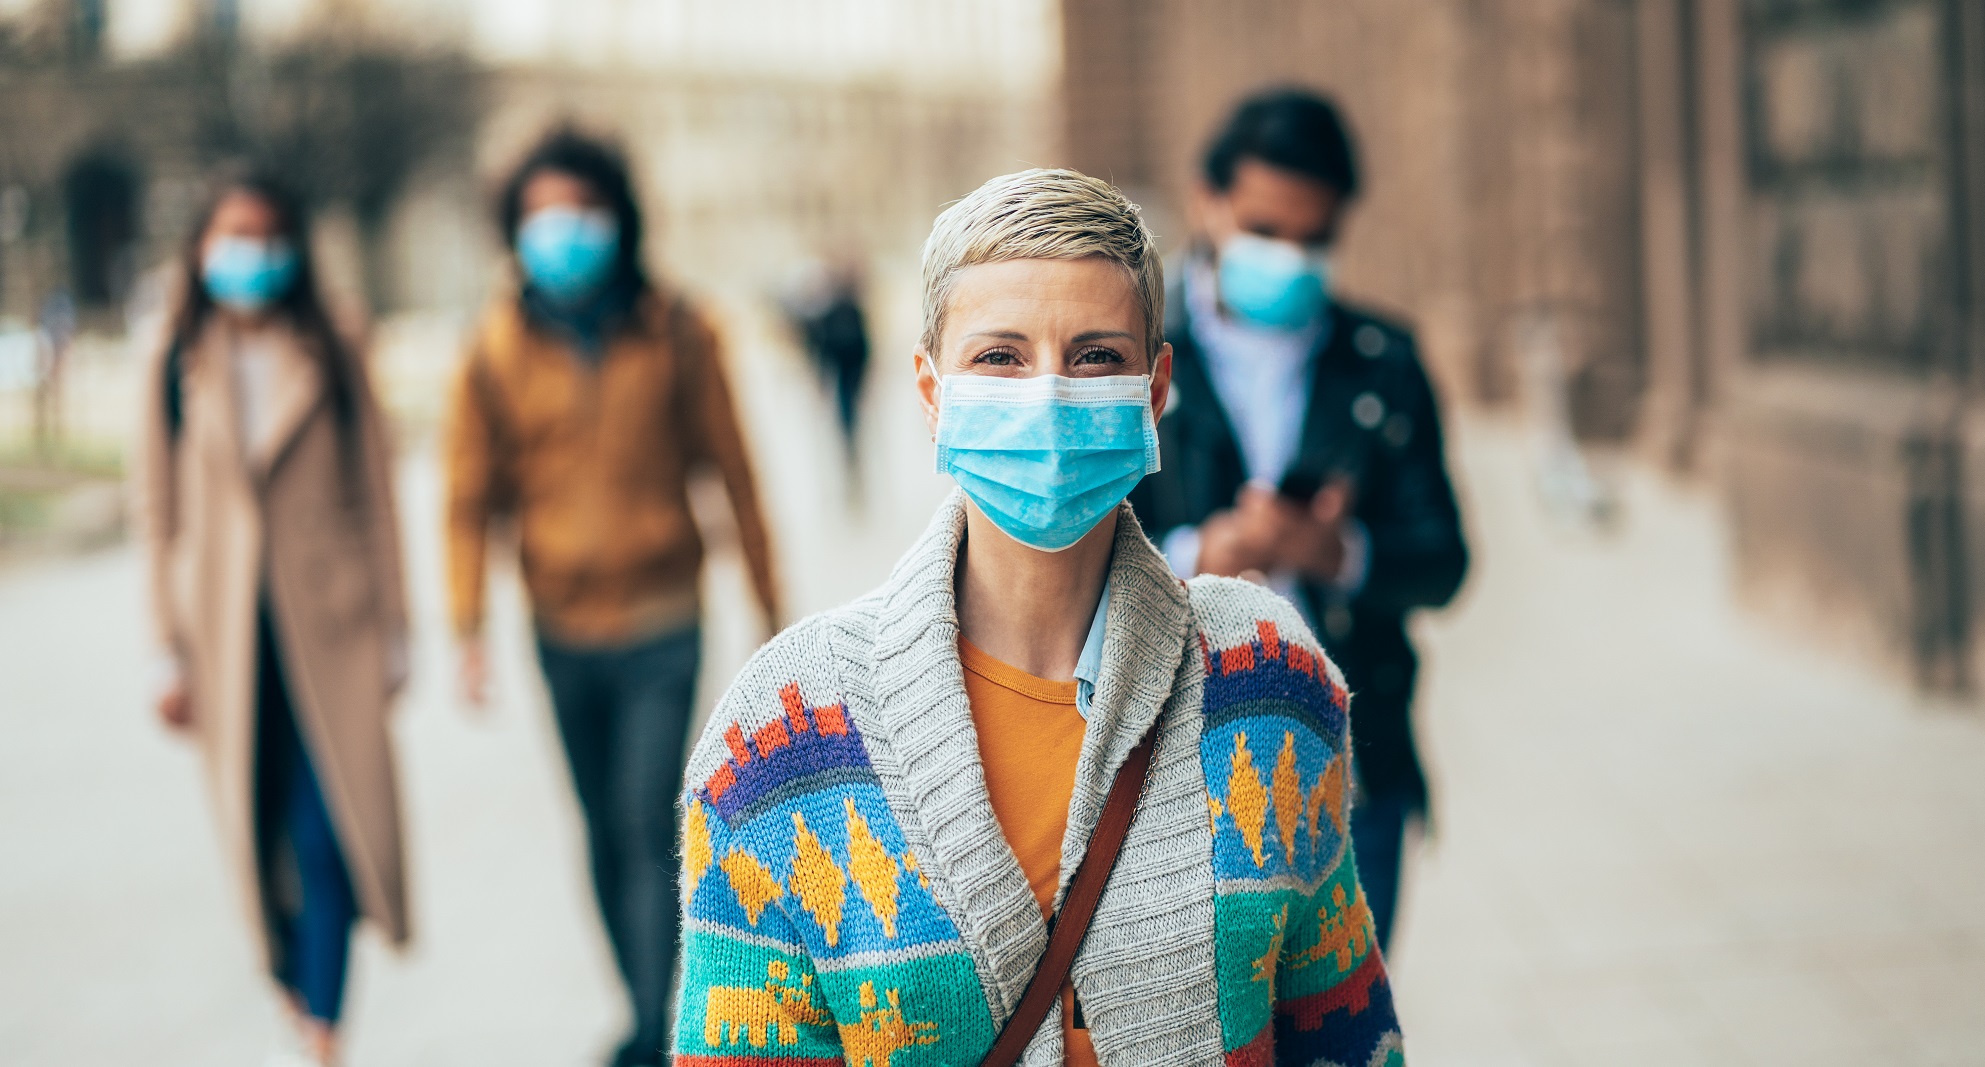 Lady in street with a face mask on